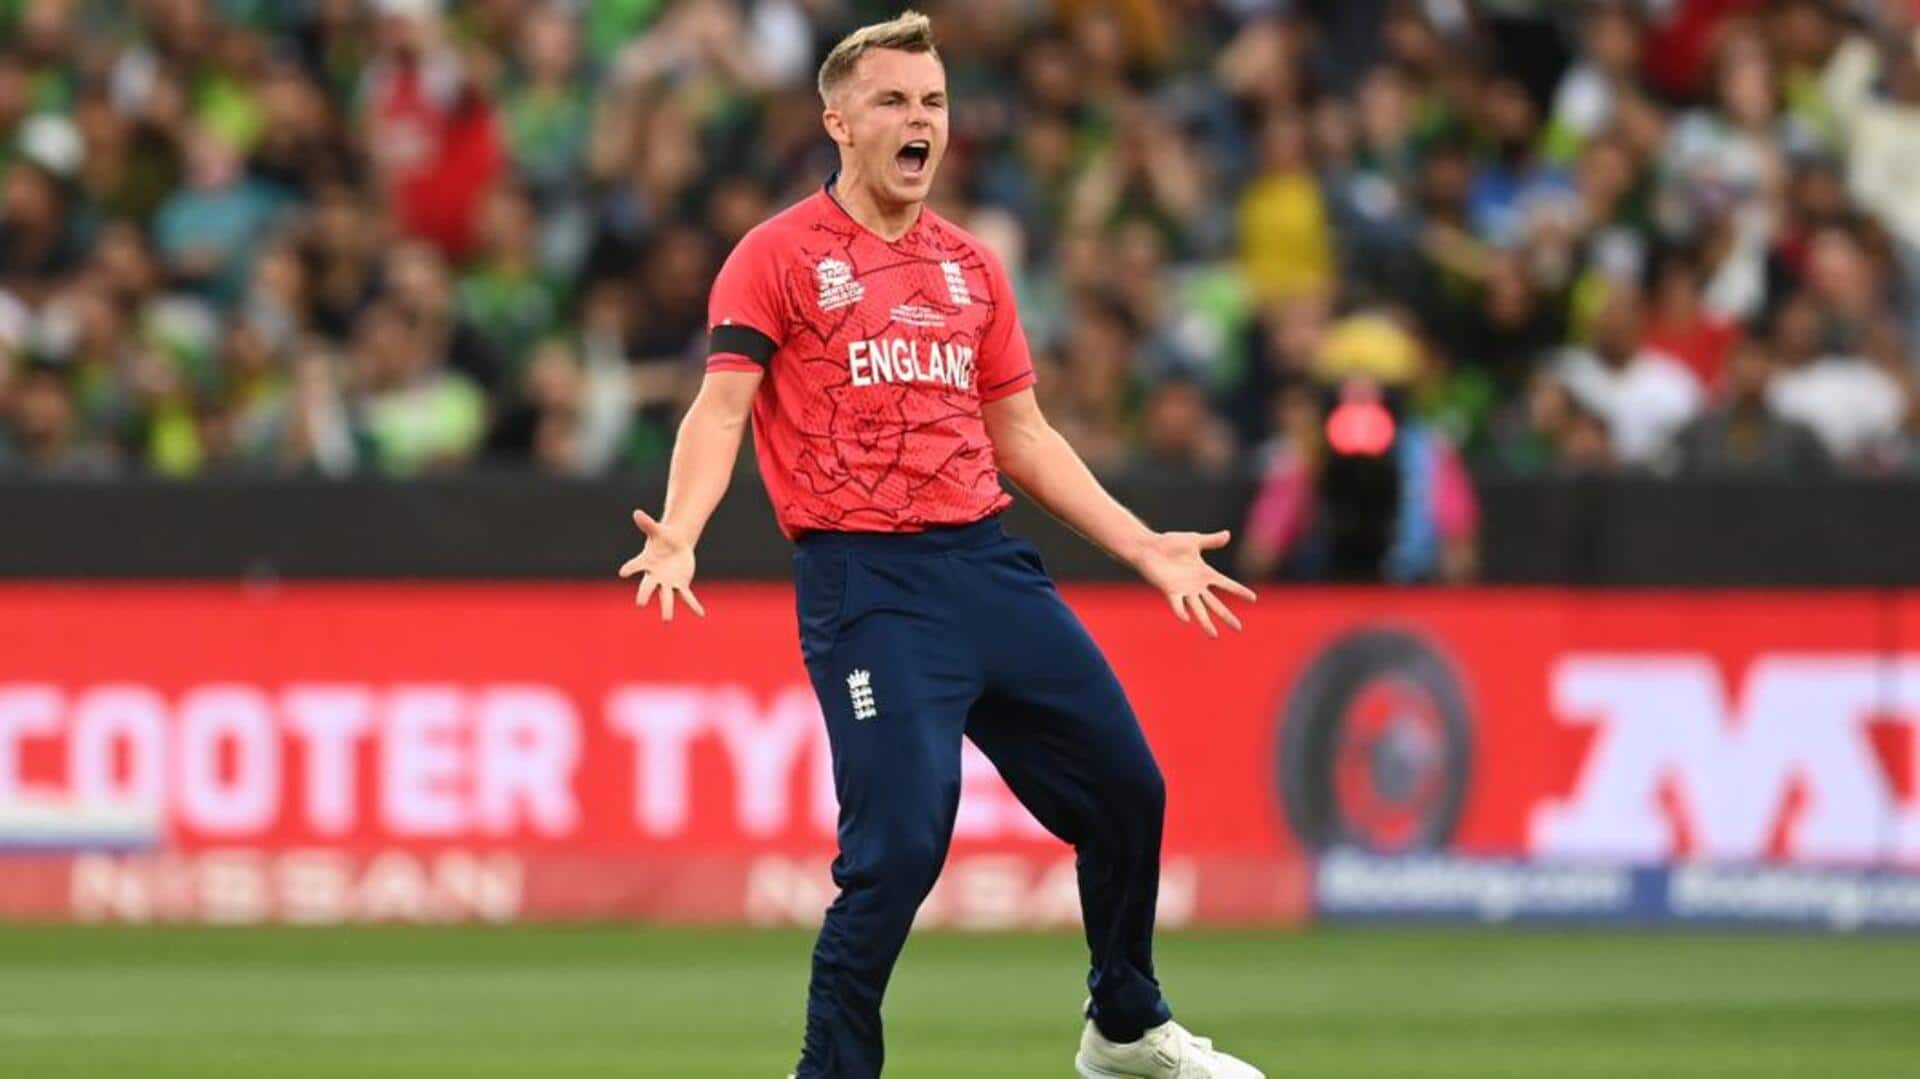 Sam Curran registers this dismal ODI record for England: Details